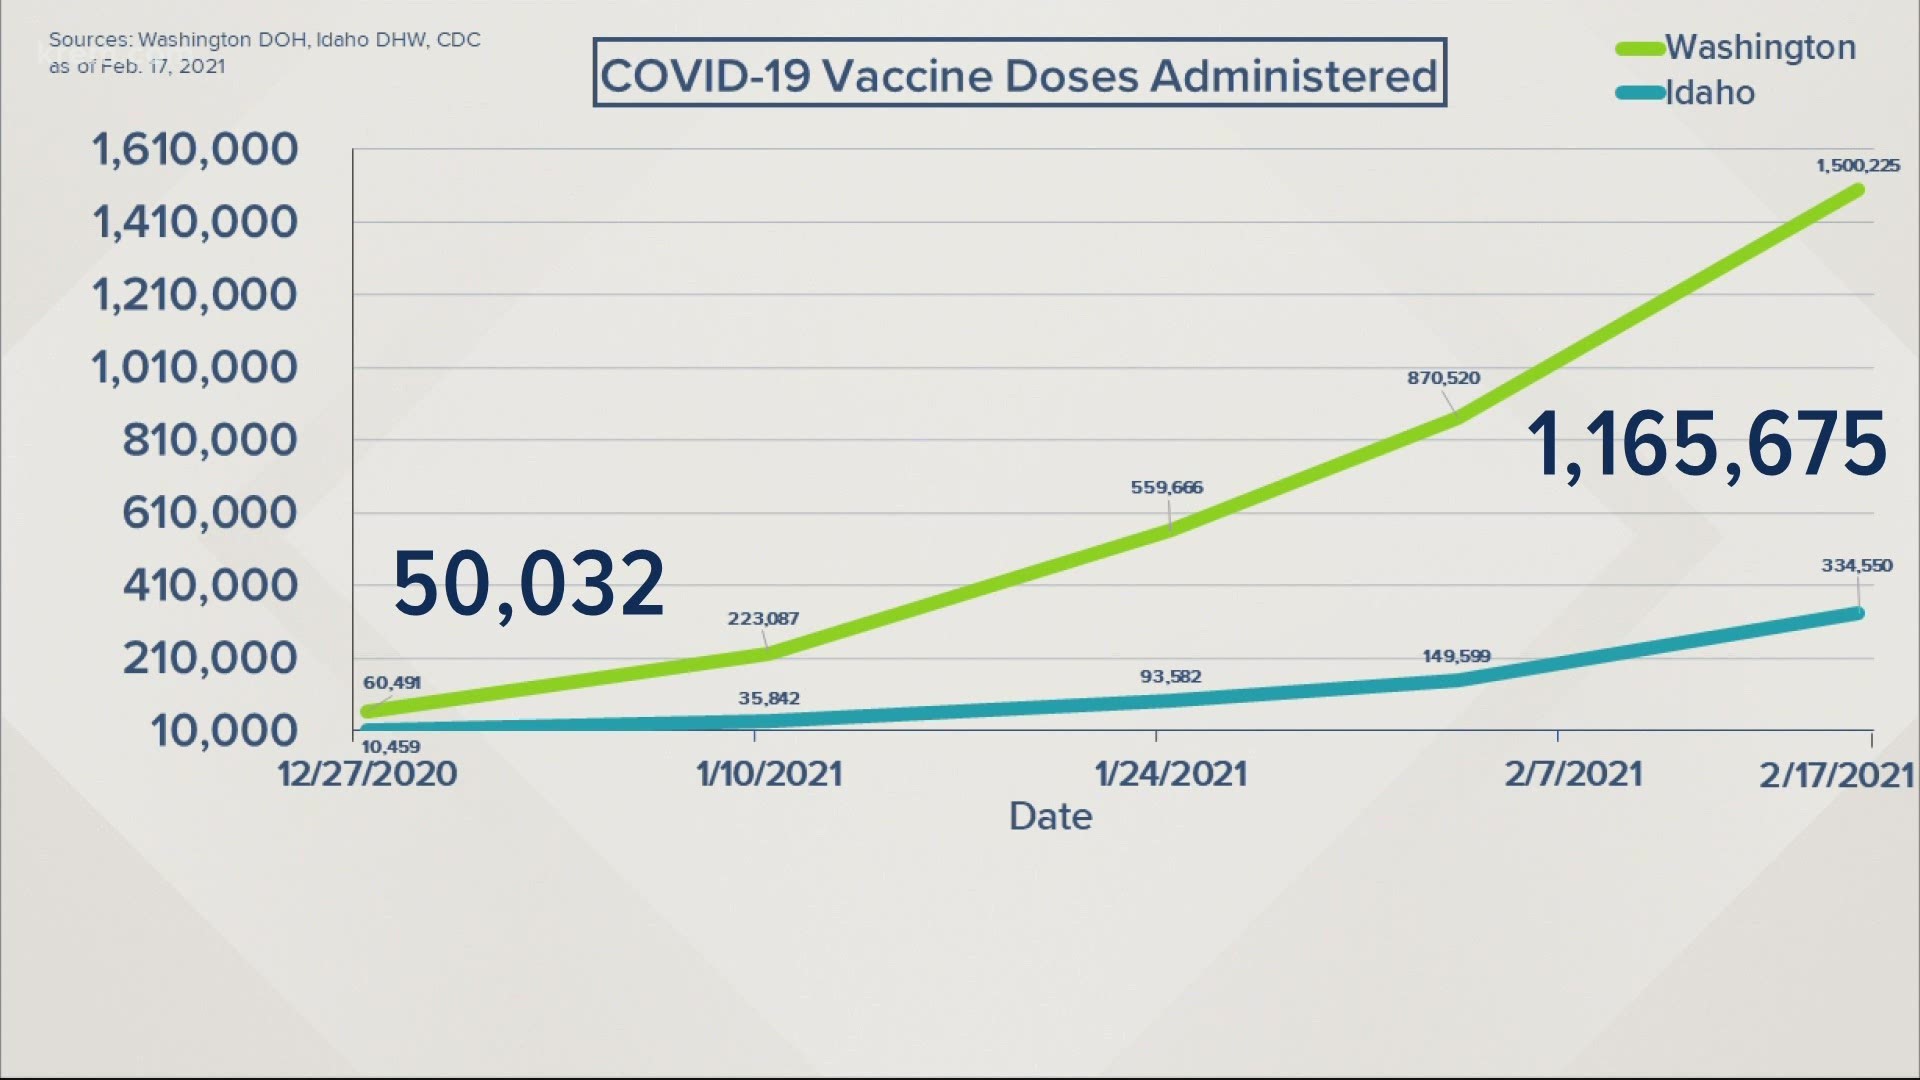 Both states have been working to vaccinate people against the coronavirus as quickly as possibly, but some have wondered if one state has an edge.